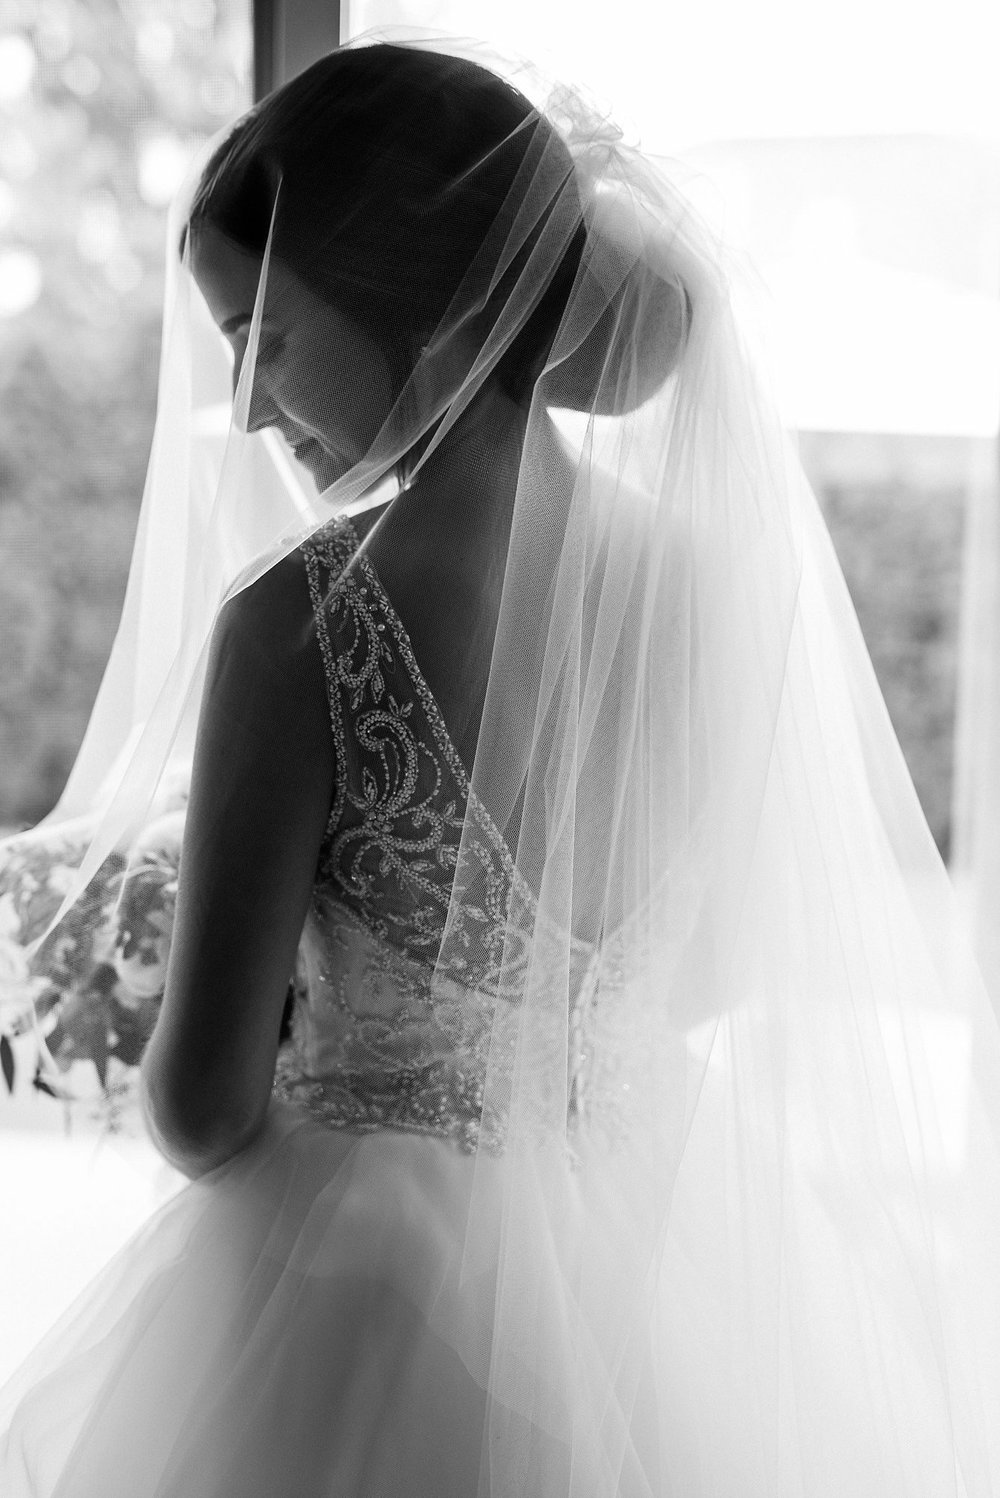 All about the VEIL! — Piera's Bridal Couture